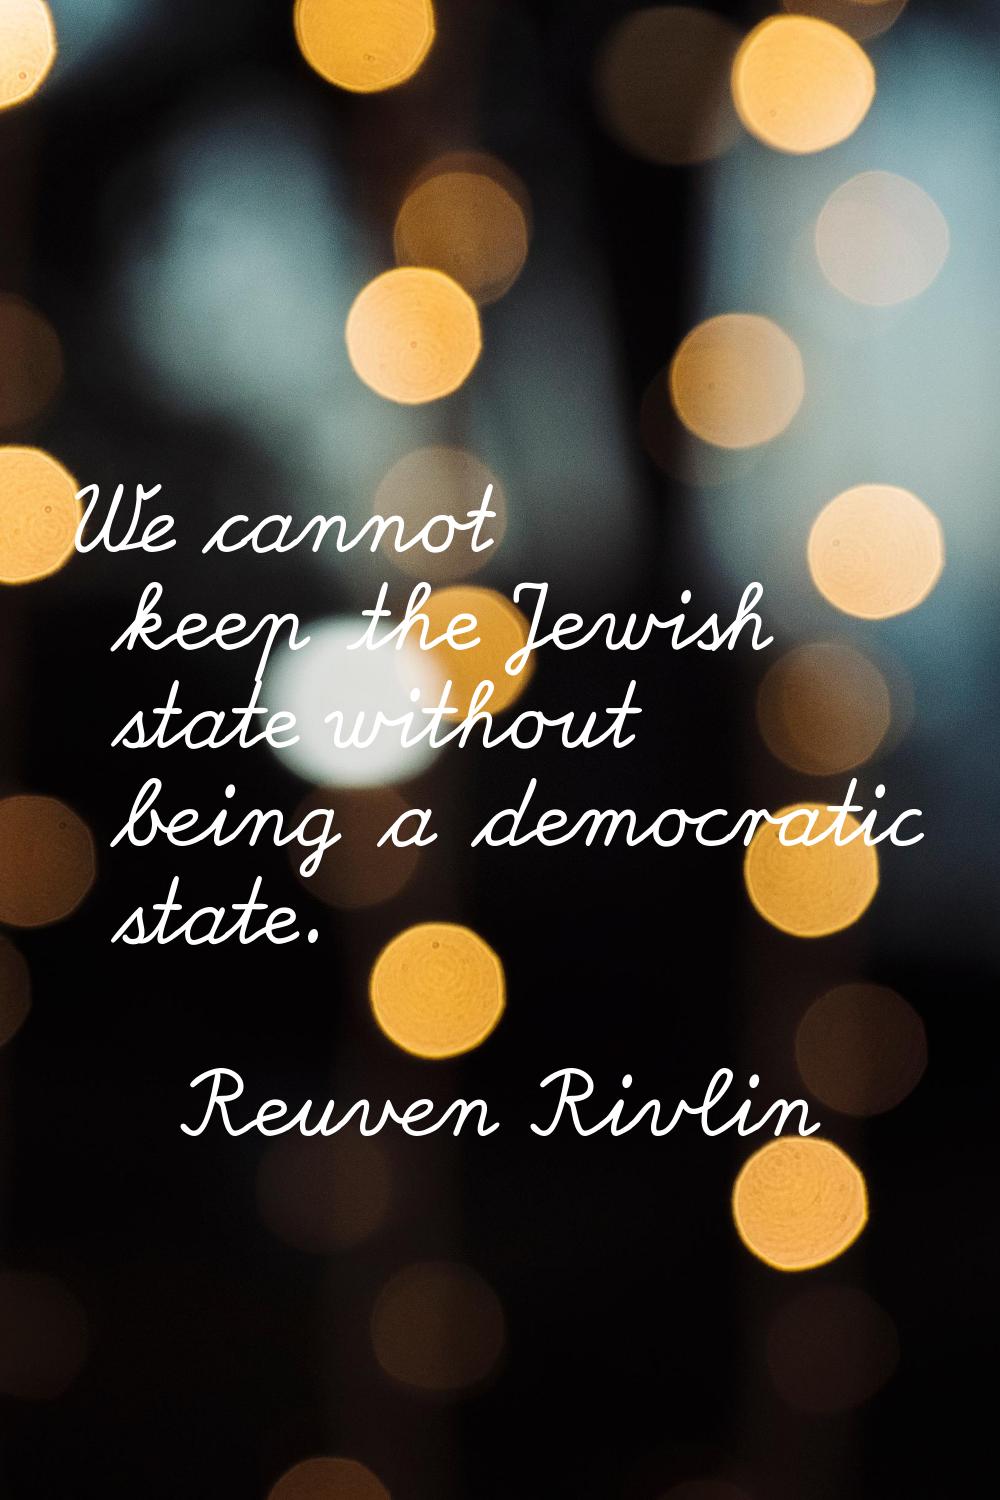 We cannot keep the Jewish state without being a democratic state.